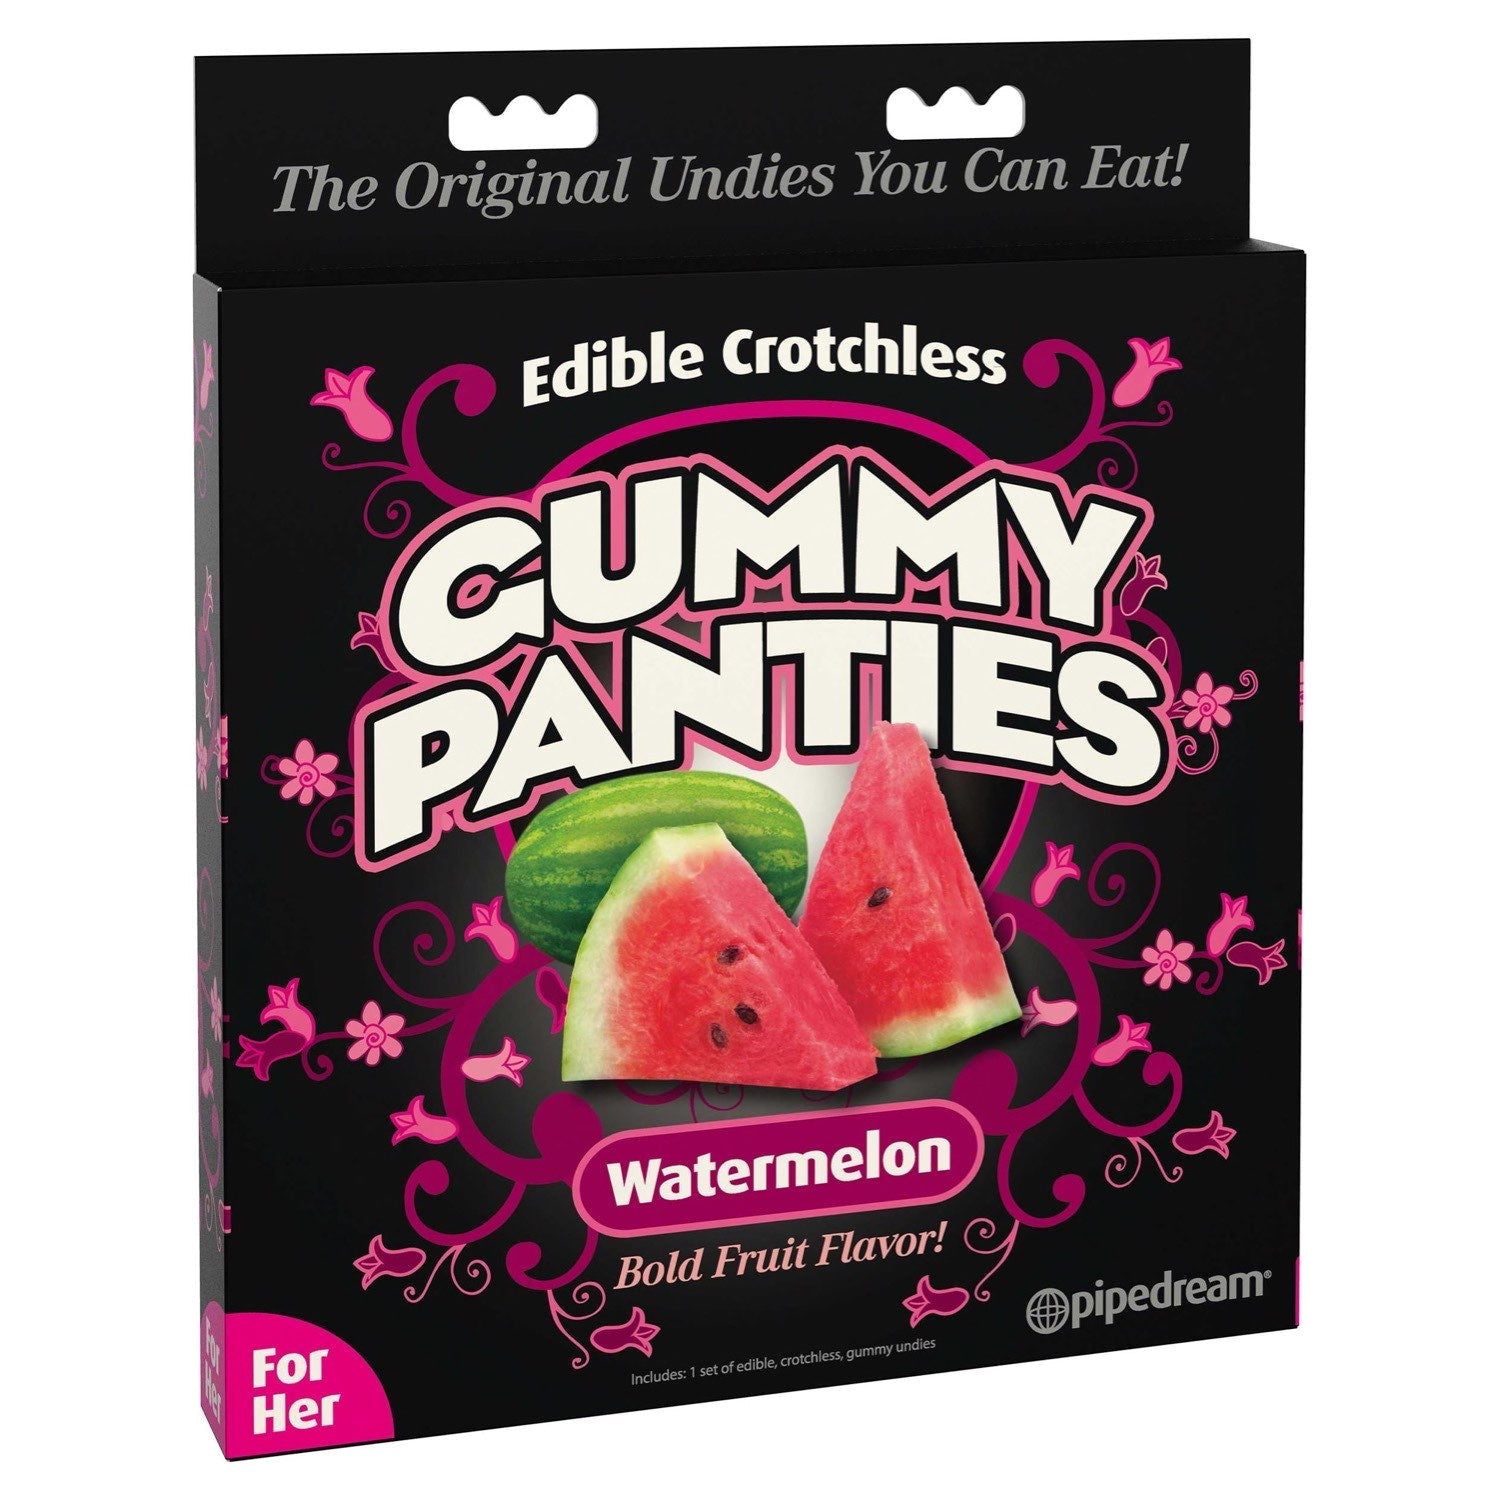  Gummy Panties - Watermelon Flavoured Edible Crotchless Panties by Pipedream